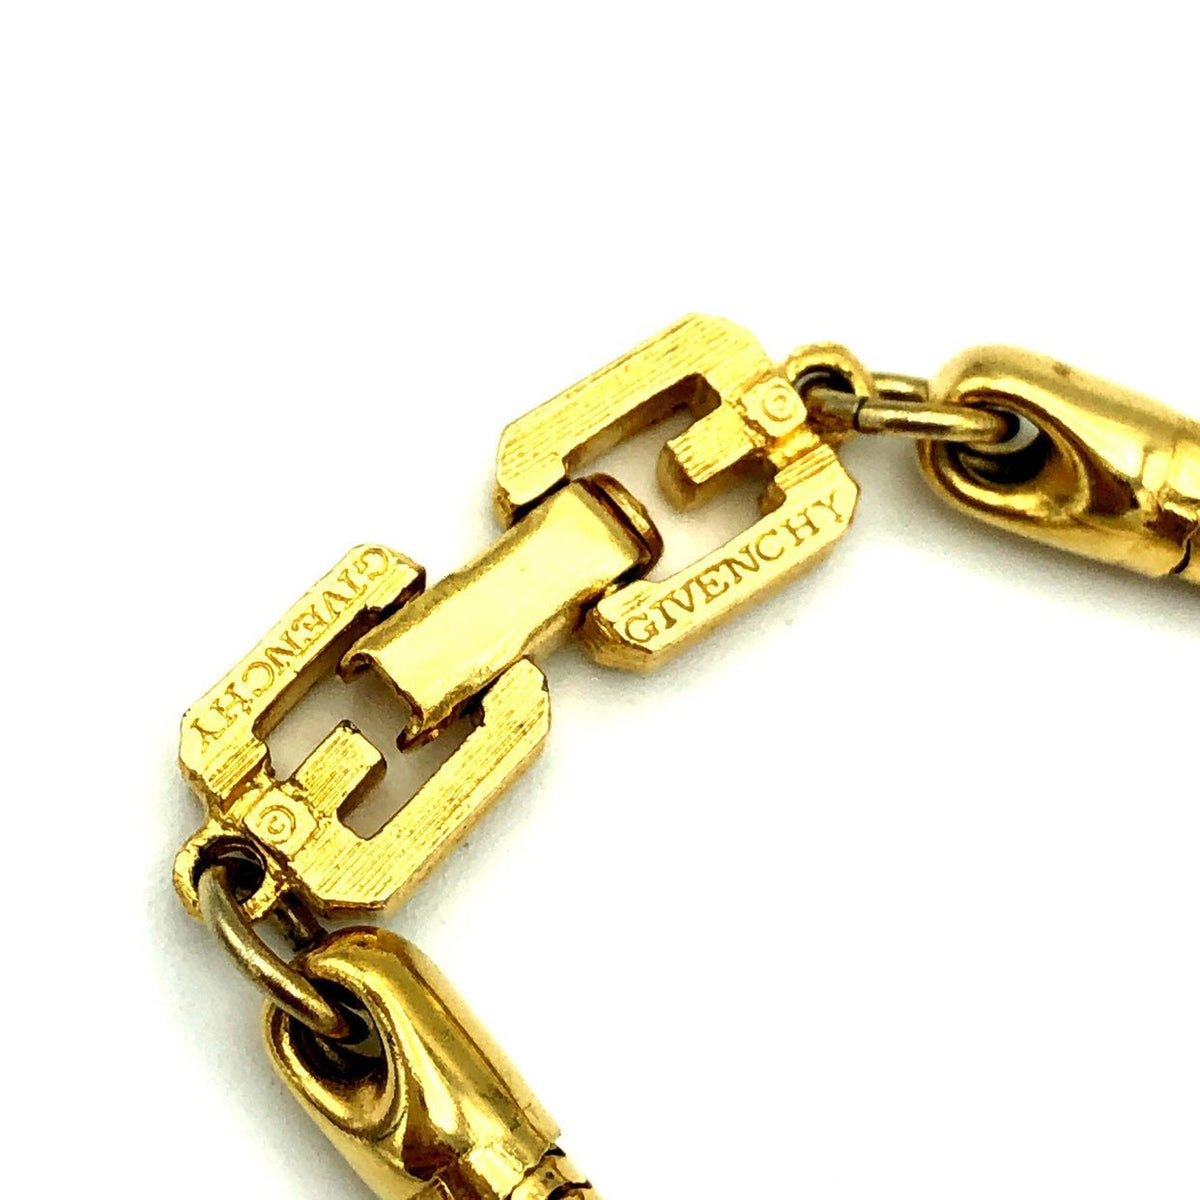 Givenchy Gold Snake Chain Vintage Necklace - 24 Wishes Vintage Jewelry